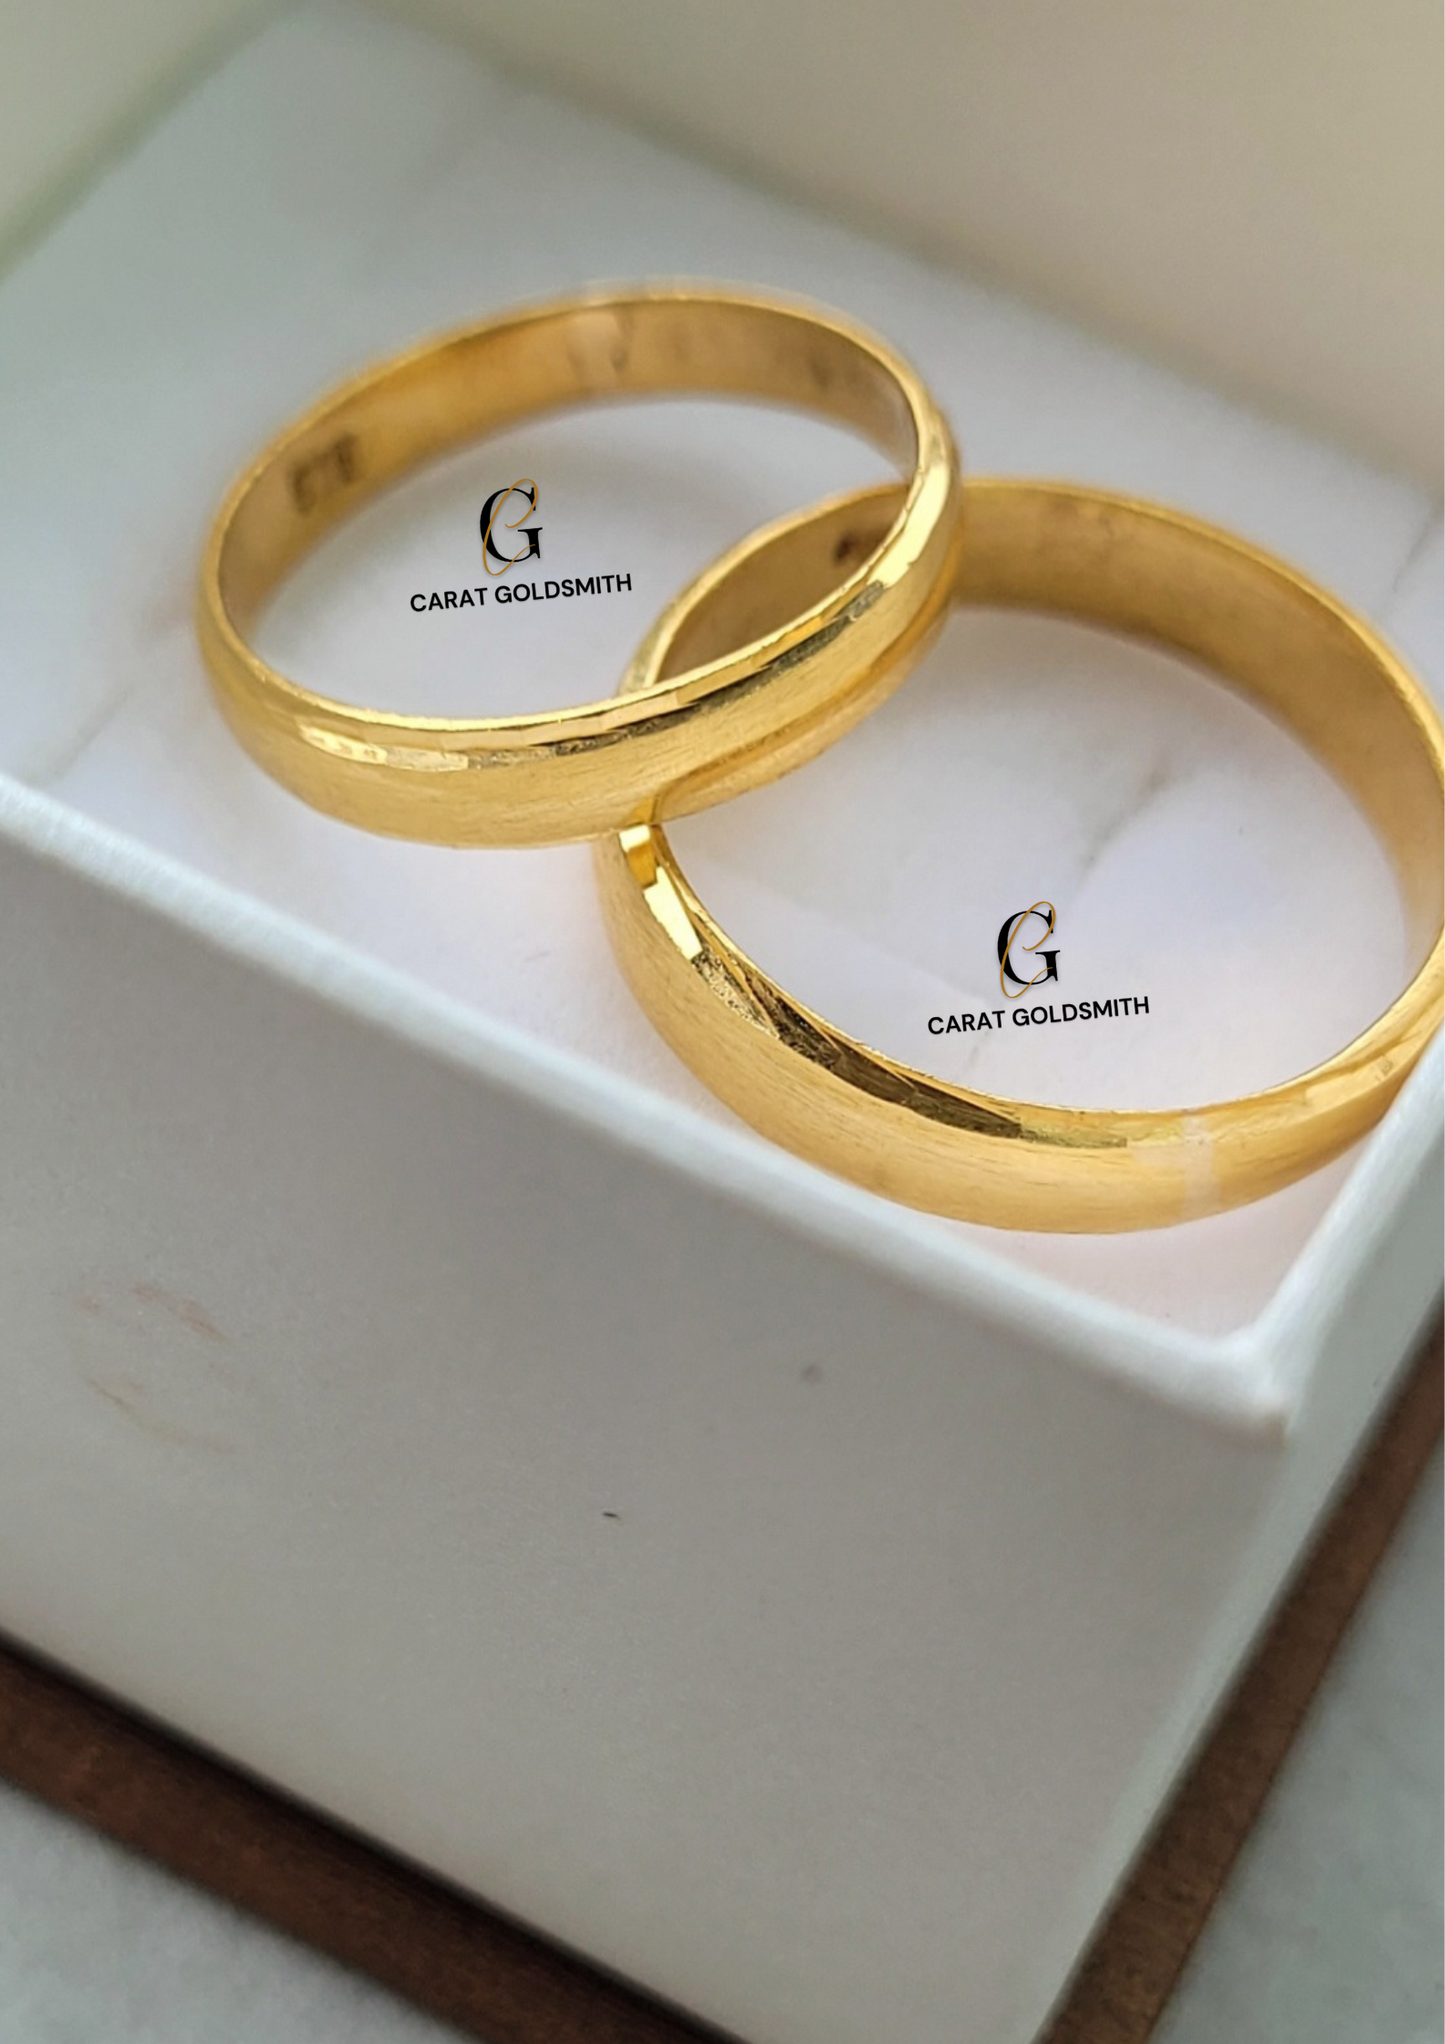 HIS AND HERS BANDS - POLISHED FINISH WITH DIAMOND CUT EDGE | MADE TO ORDER | DISPATCHED WITHIN 1 WEEK